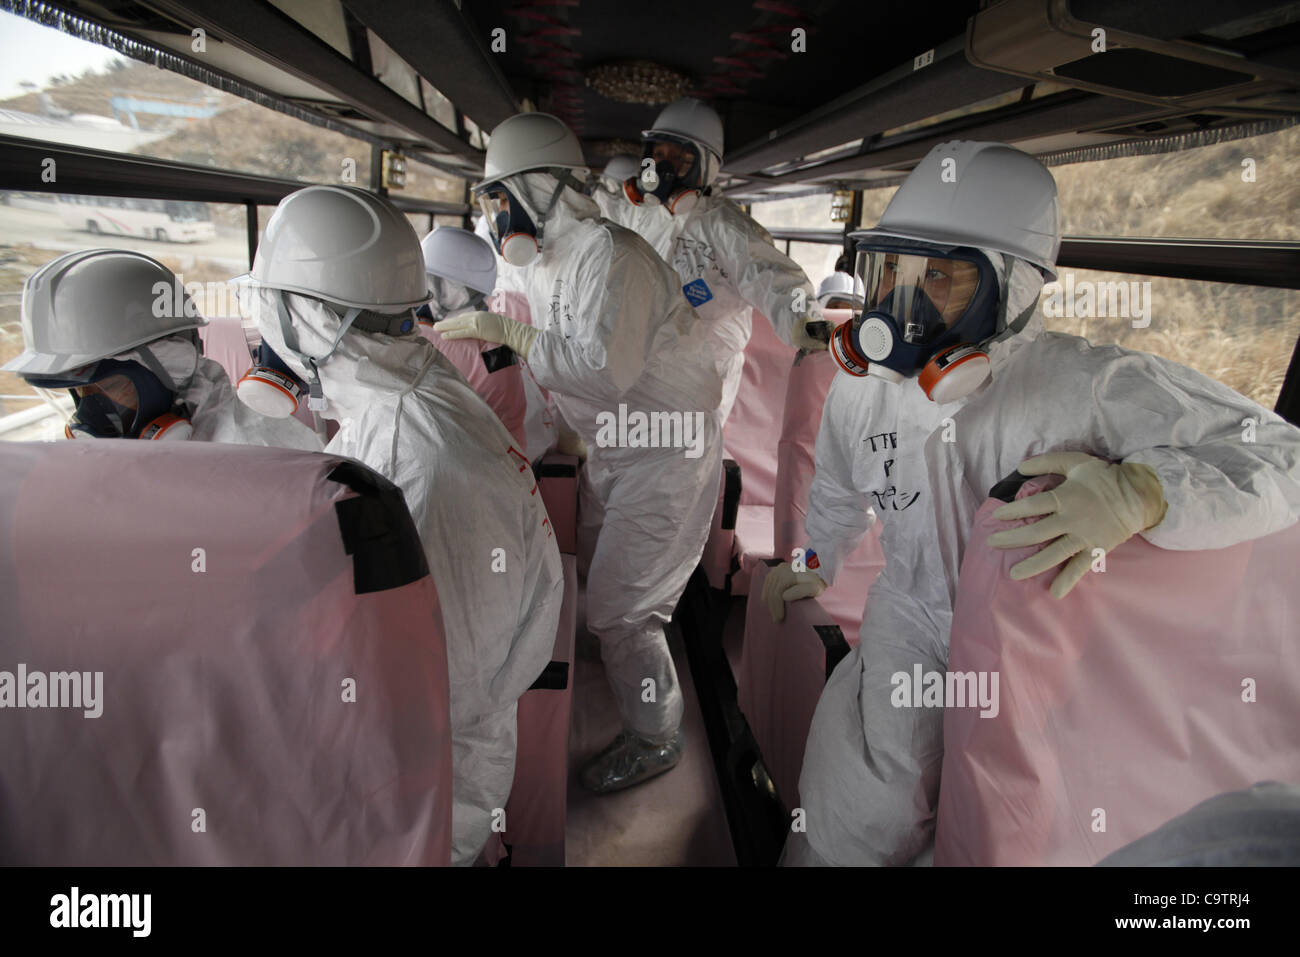 Feb. 20, 2012 - Fukushima, Japan - Tokyo Electric Power Company officials and members of the media look at TEPCO's Fukushima Daiichi nuclear power plant from bus windows. The journalists were let into the plant ahead of the anniversary of the March 11, 2011 tsunami and earthquake for the second time Stock Photo